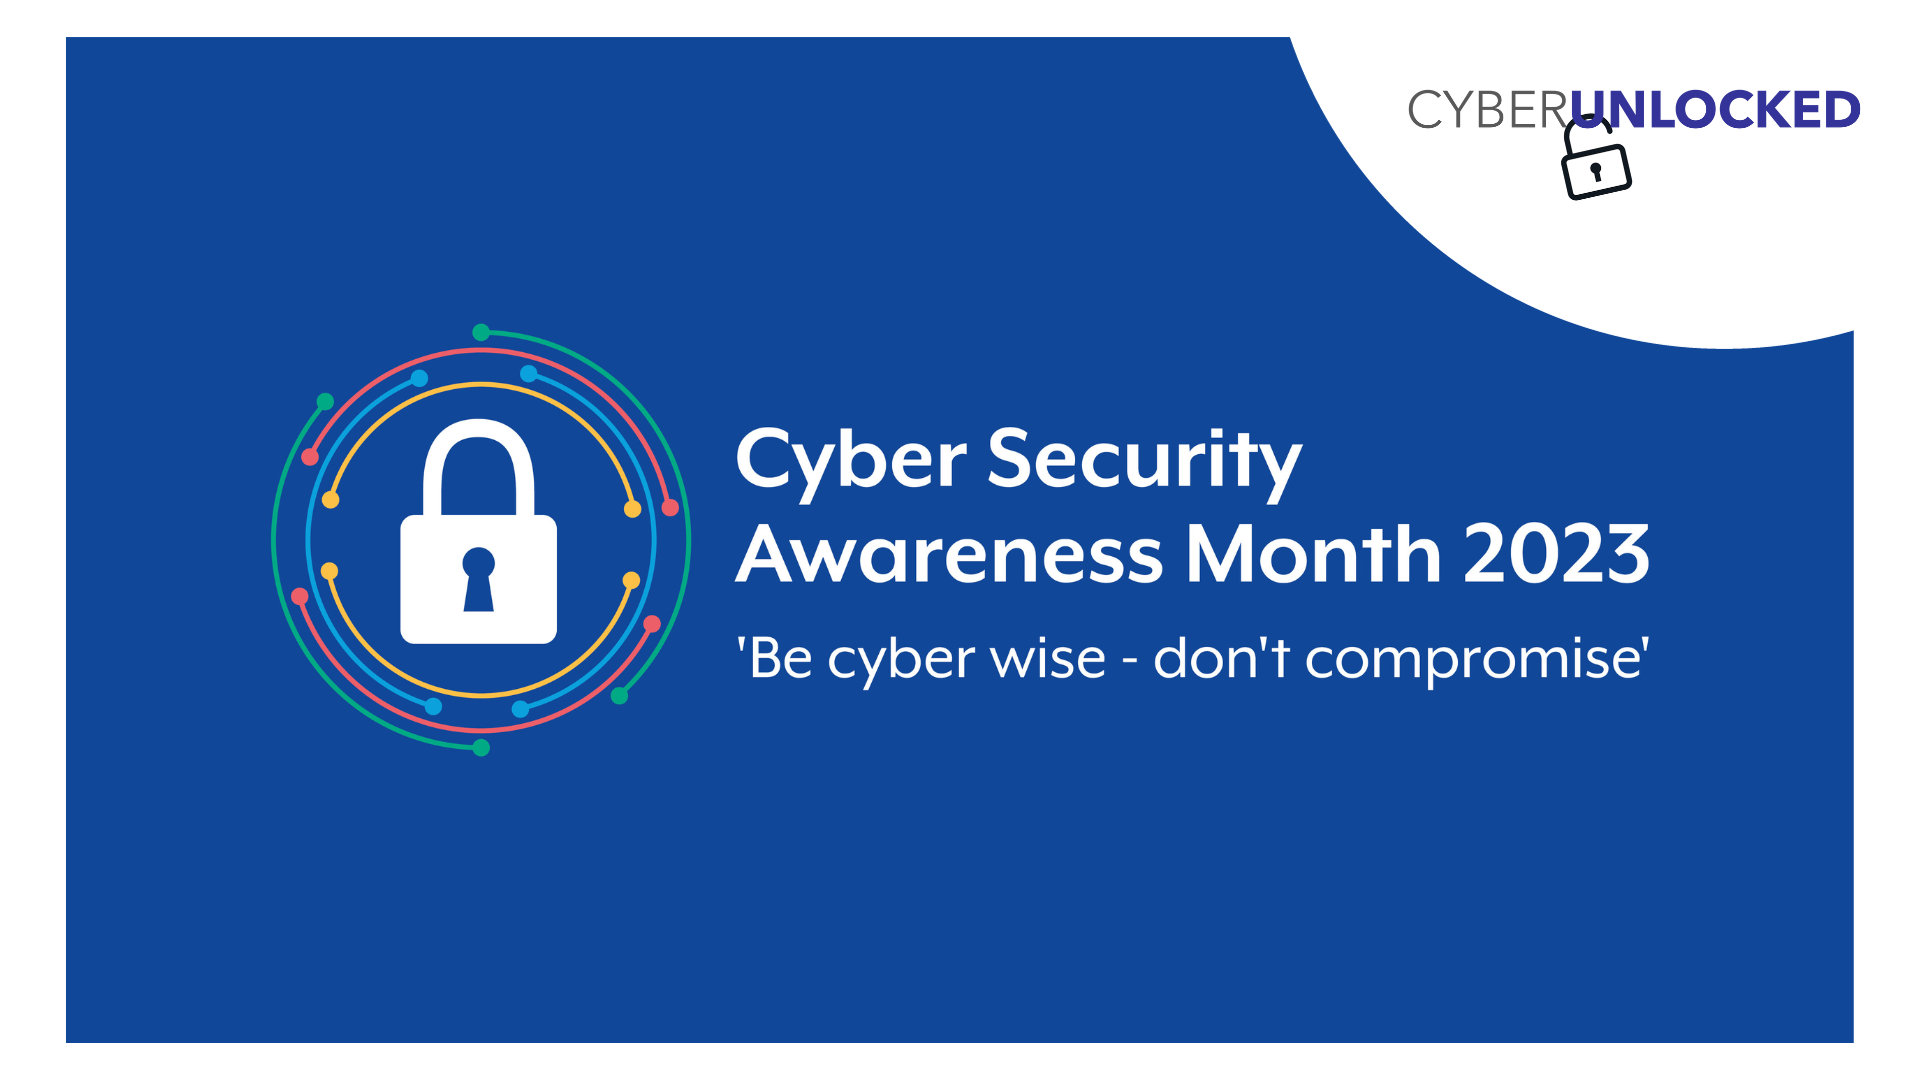 5 Must-Dos During Cyber Security Awareness Month